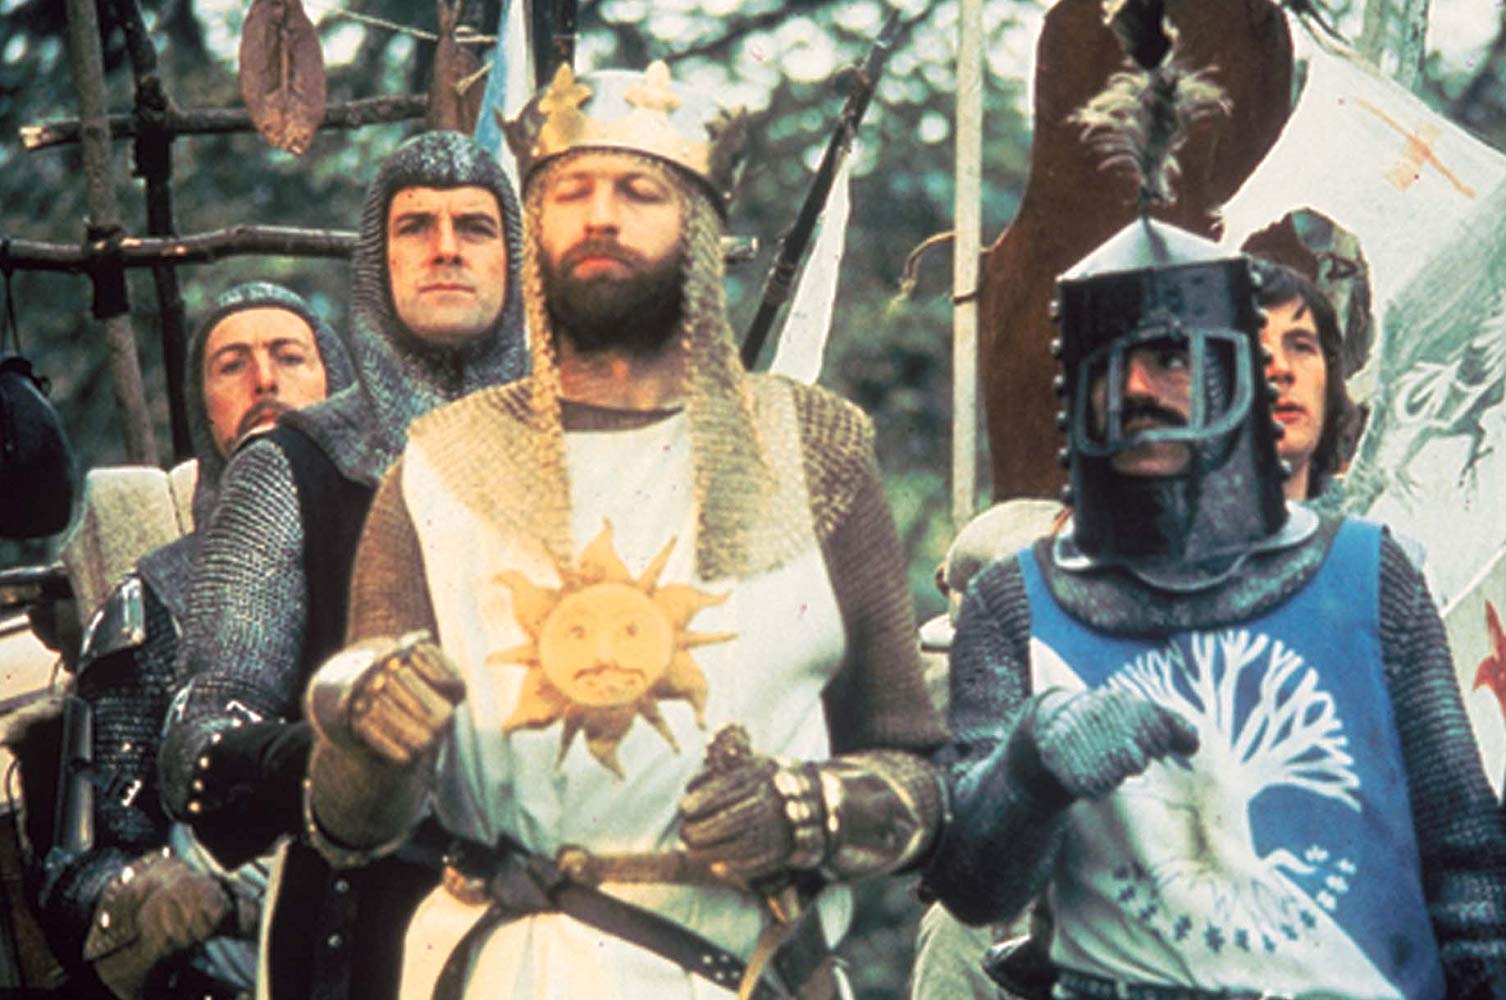 King Arthur and his Knights of the Round Table embark on a surreal, low-budget search for the Holy Grail, encountering many, very silly obstacles.